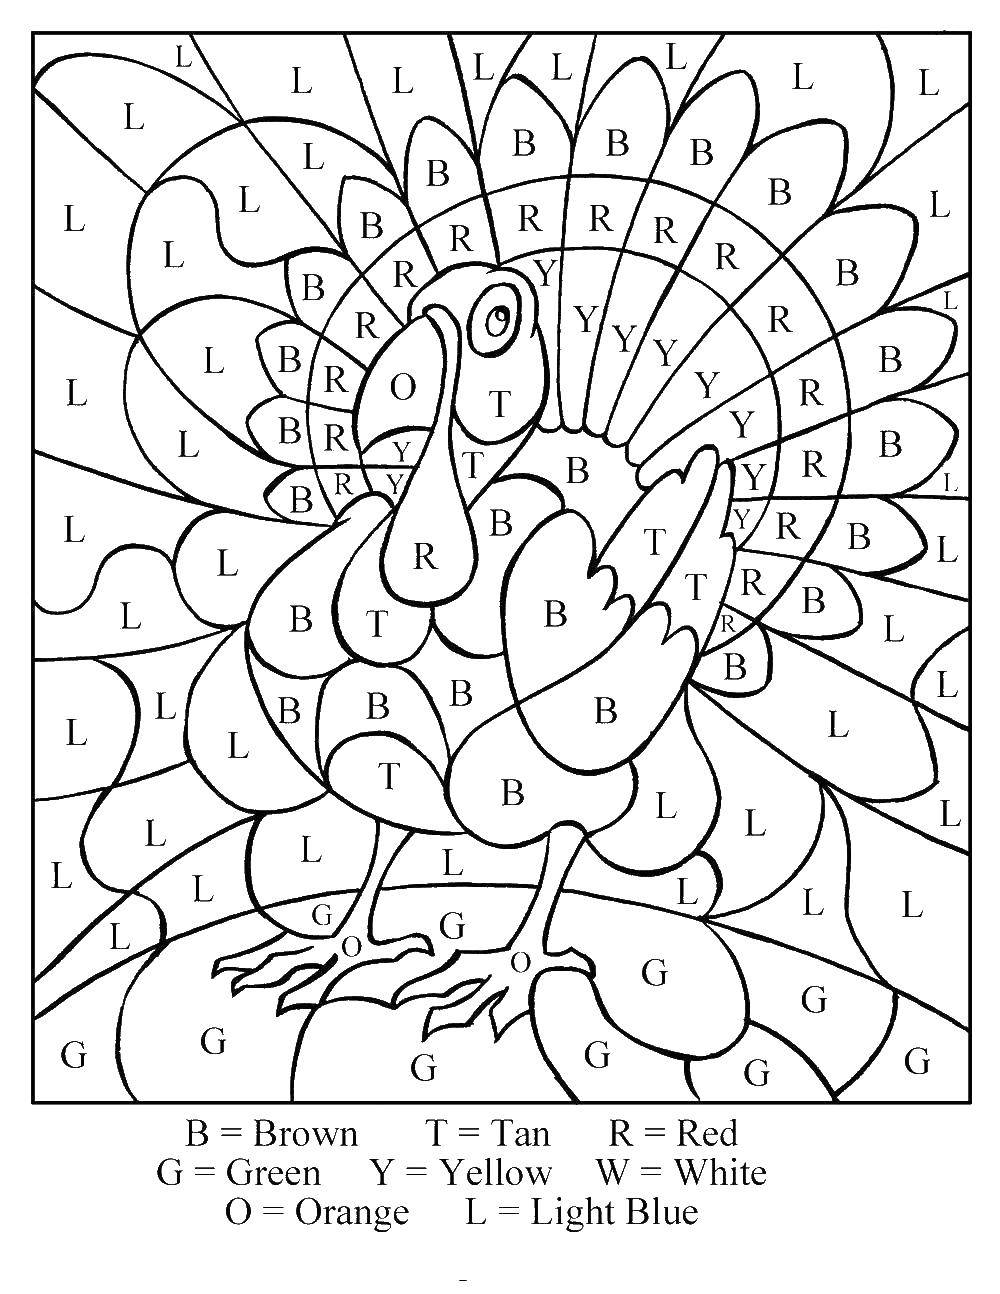 Coloring Painting by numbers. Category That number. Tags:  The sample numbers.